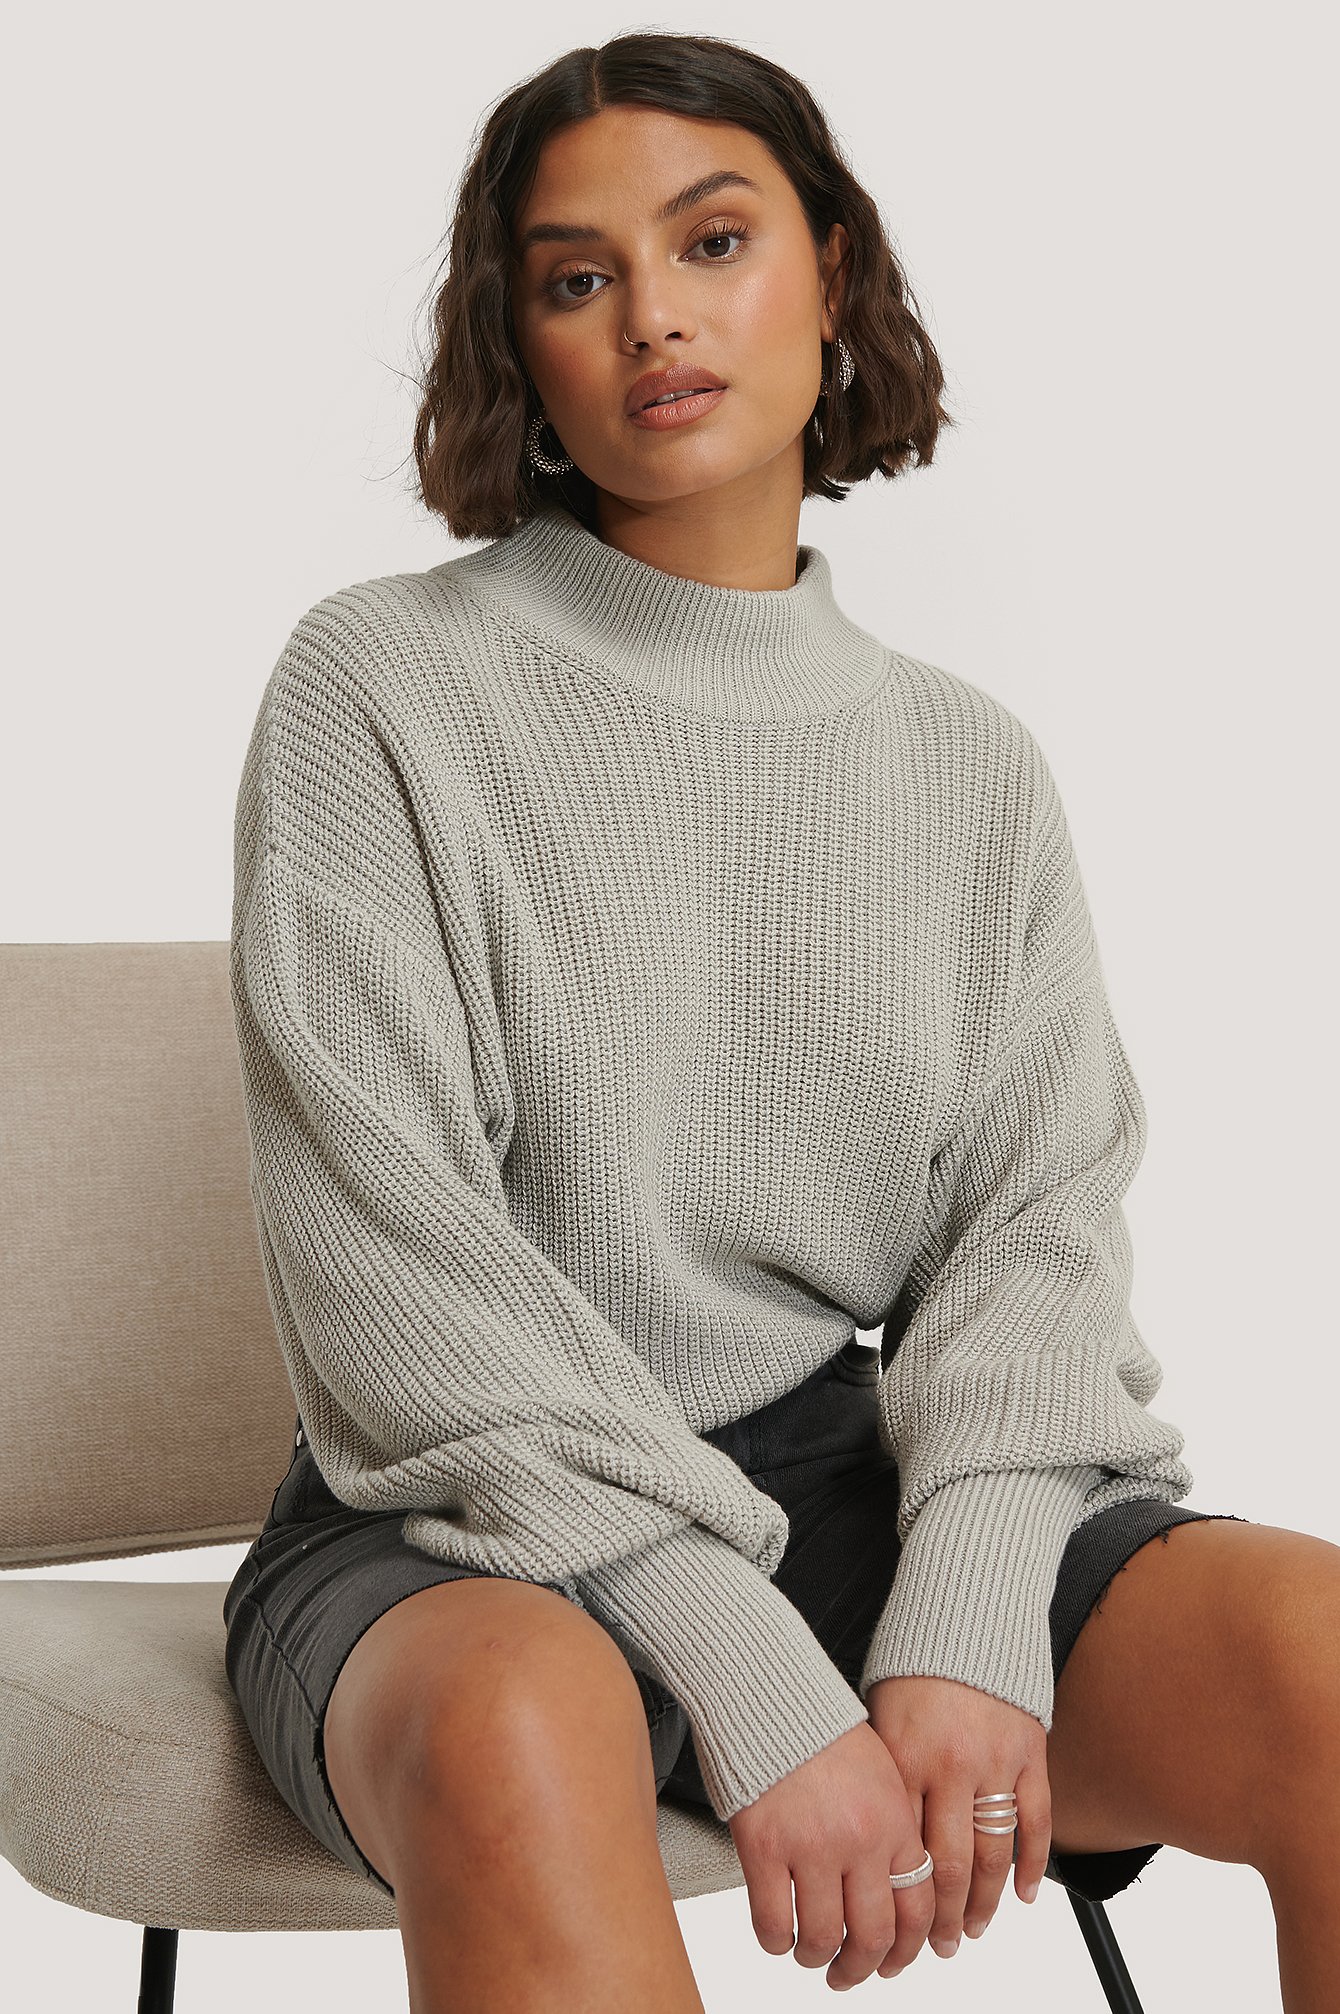 Grey Volume Sleeve High Neck Knitted Sweater